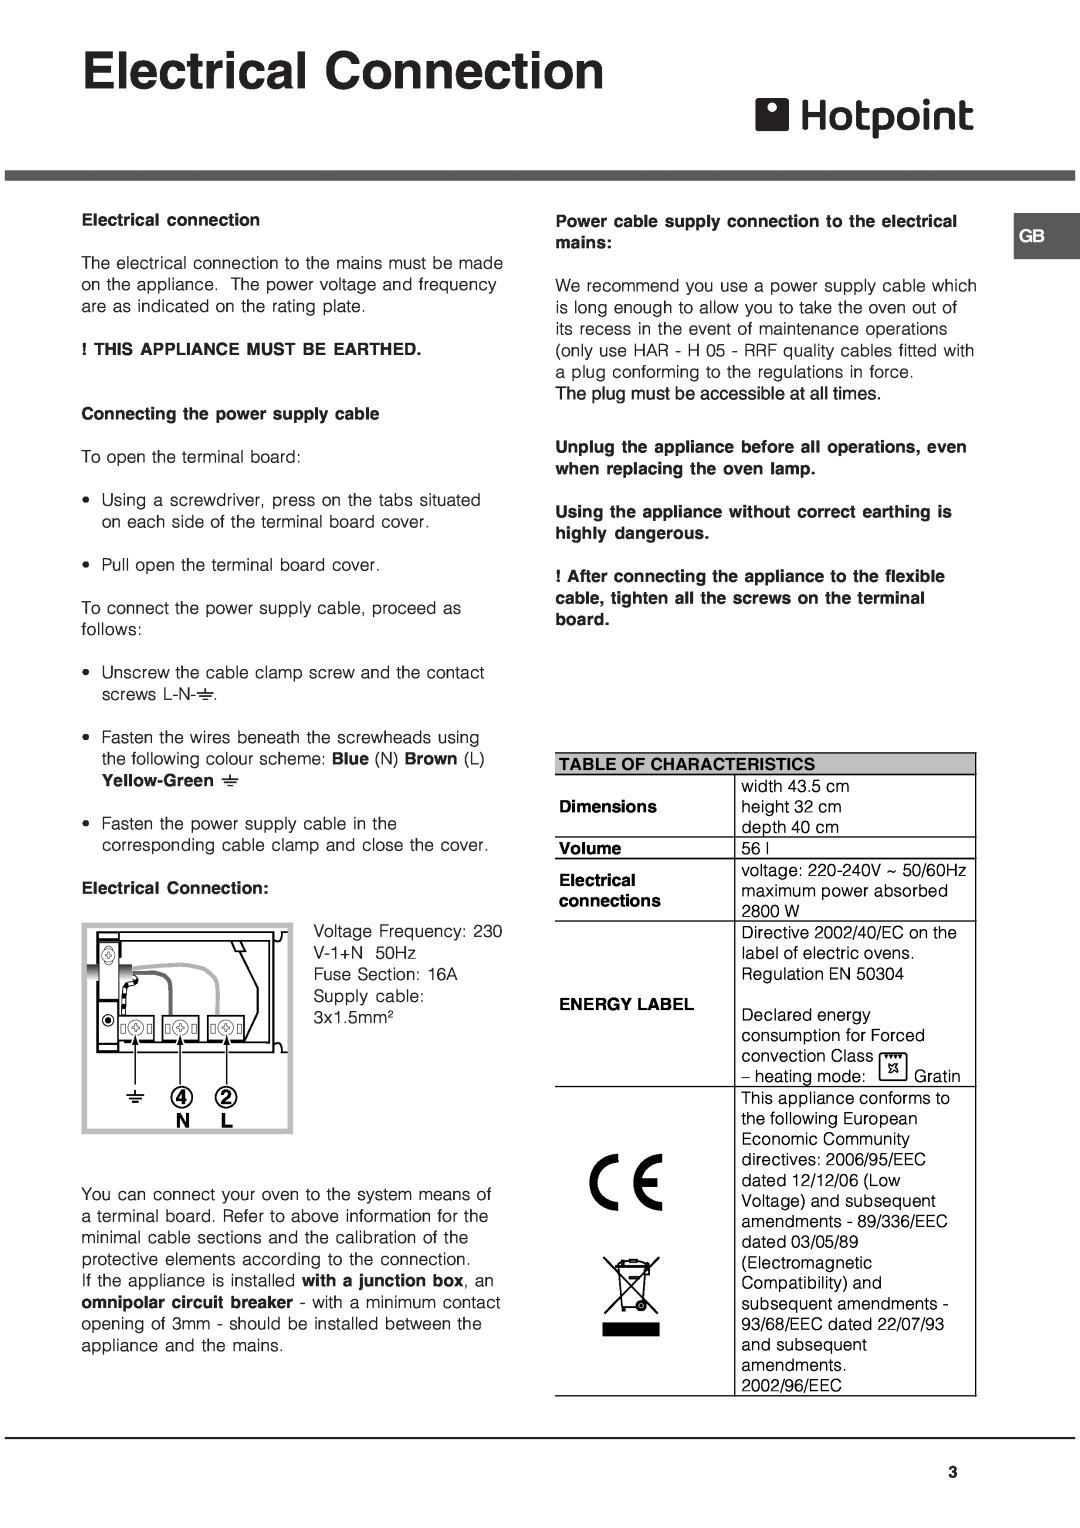 Hotpoint SE103PGX, SQ103PGI manual Electrical Connection, 4 2 N L, The plug must be accessible at all times 